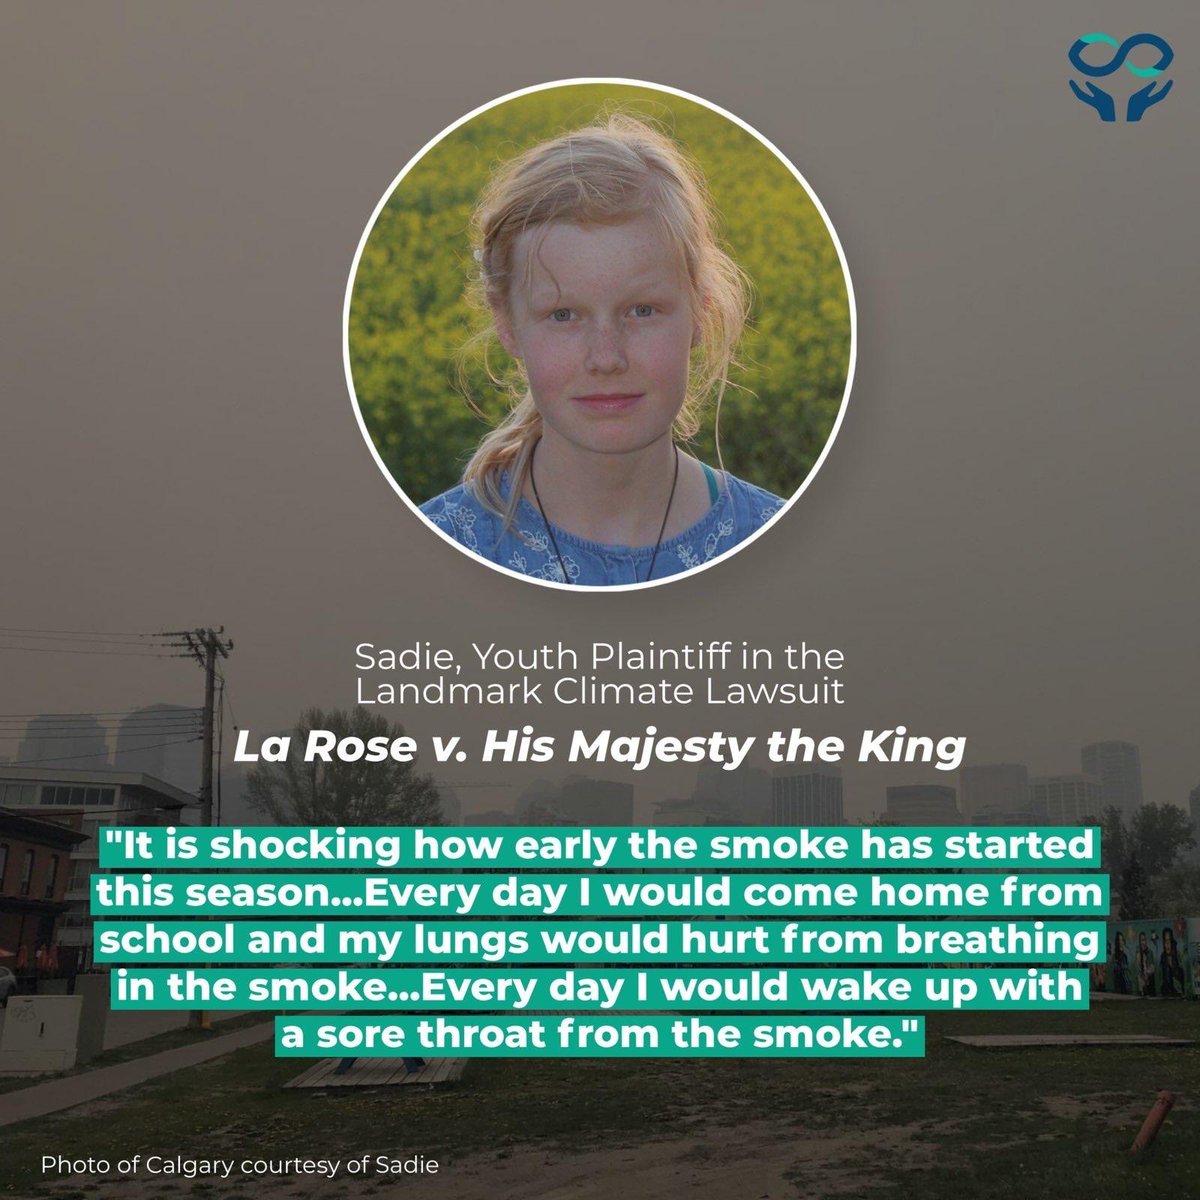 Sadie is one of 15 youth plaintiffs in the climate lawsuit La Rose v. His Majesty the King, arguing they are being harmed by the climate crisis and their federal govt. is violating their charter rights. Learn more: ourchildrenstrust.org/canada #YouthvGov